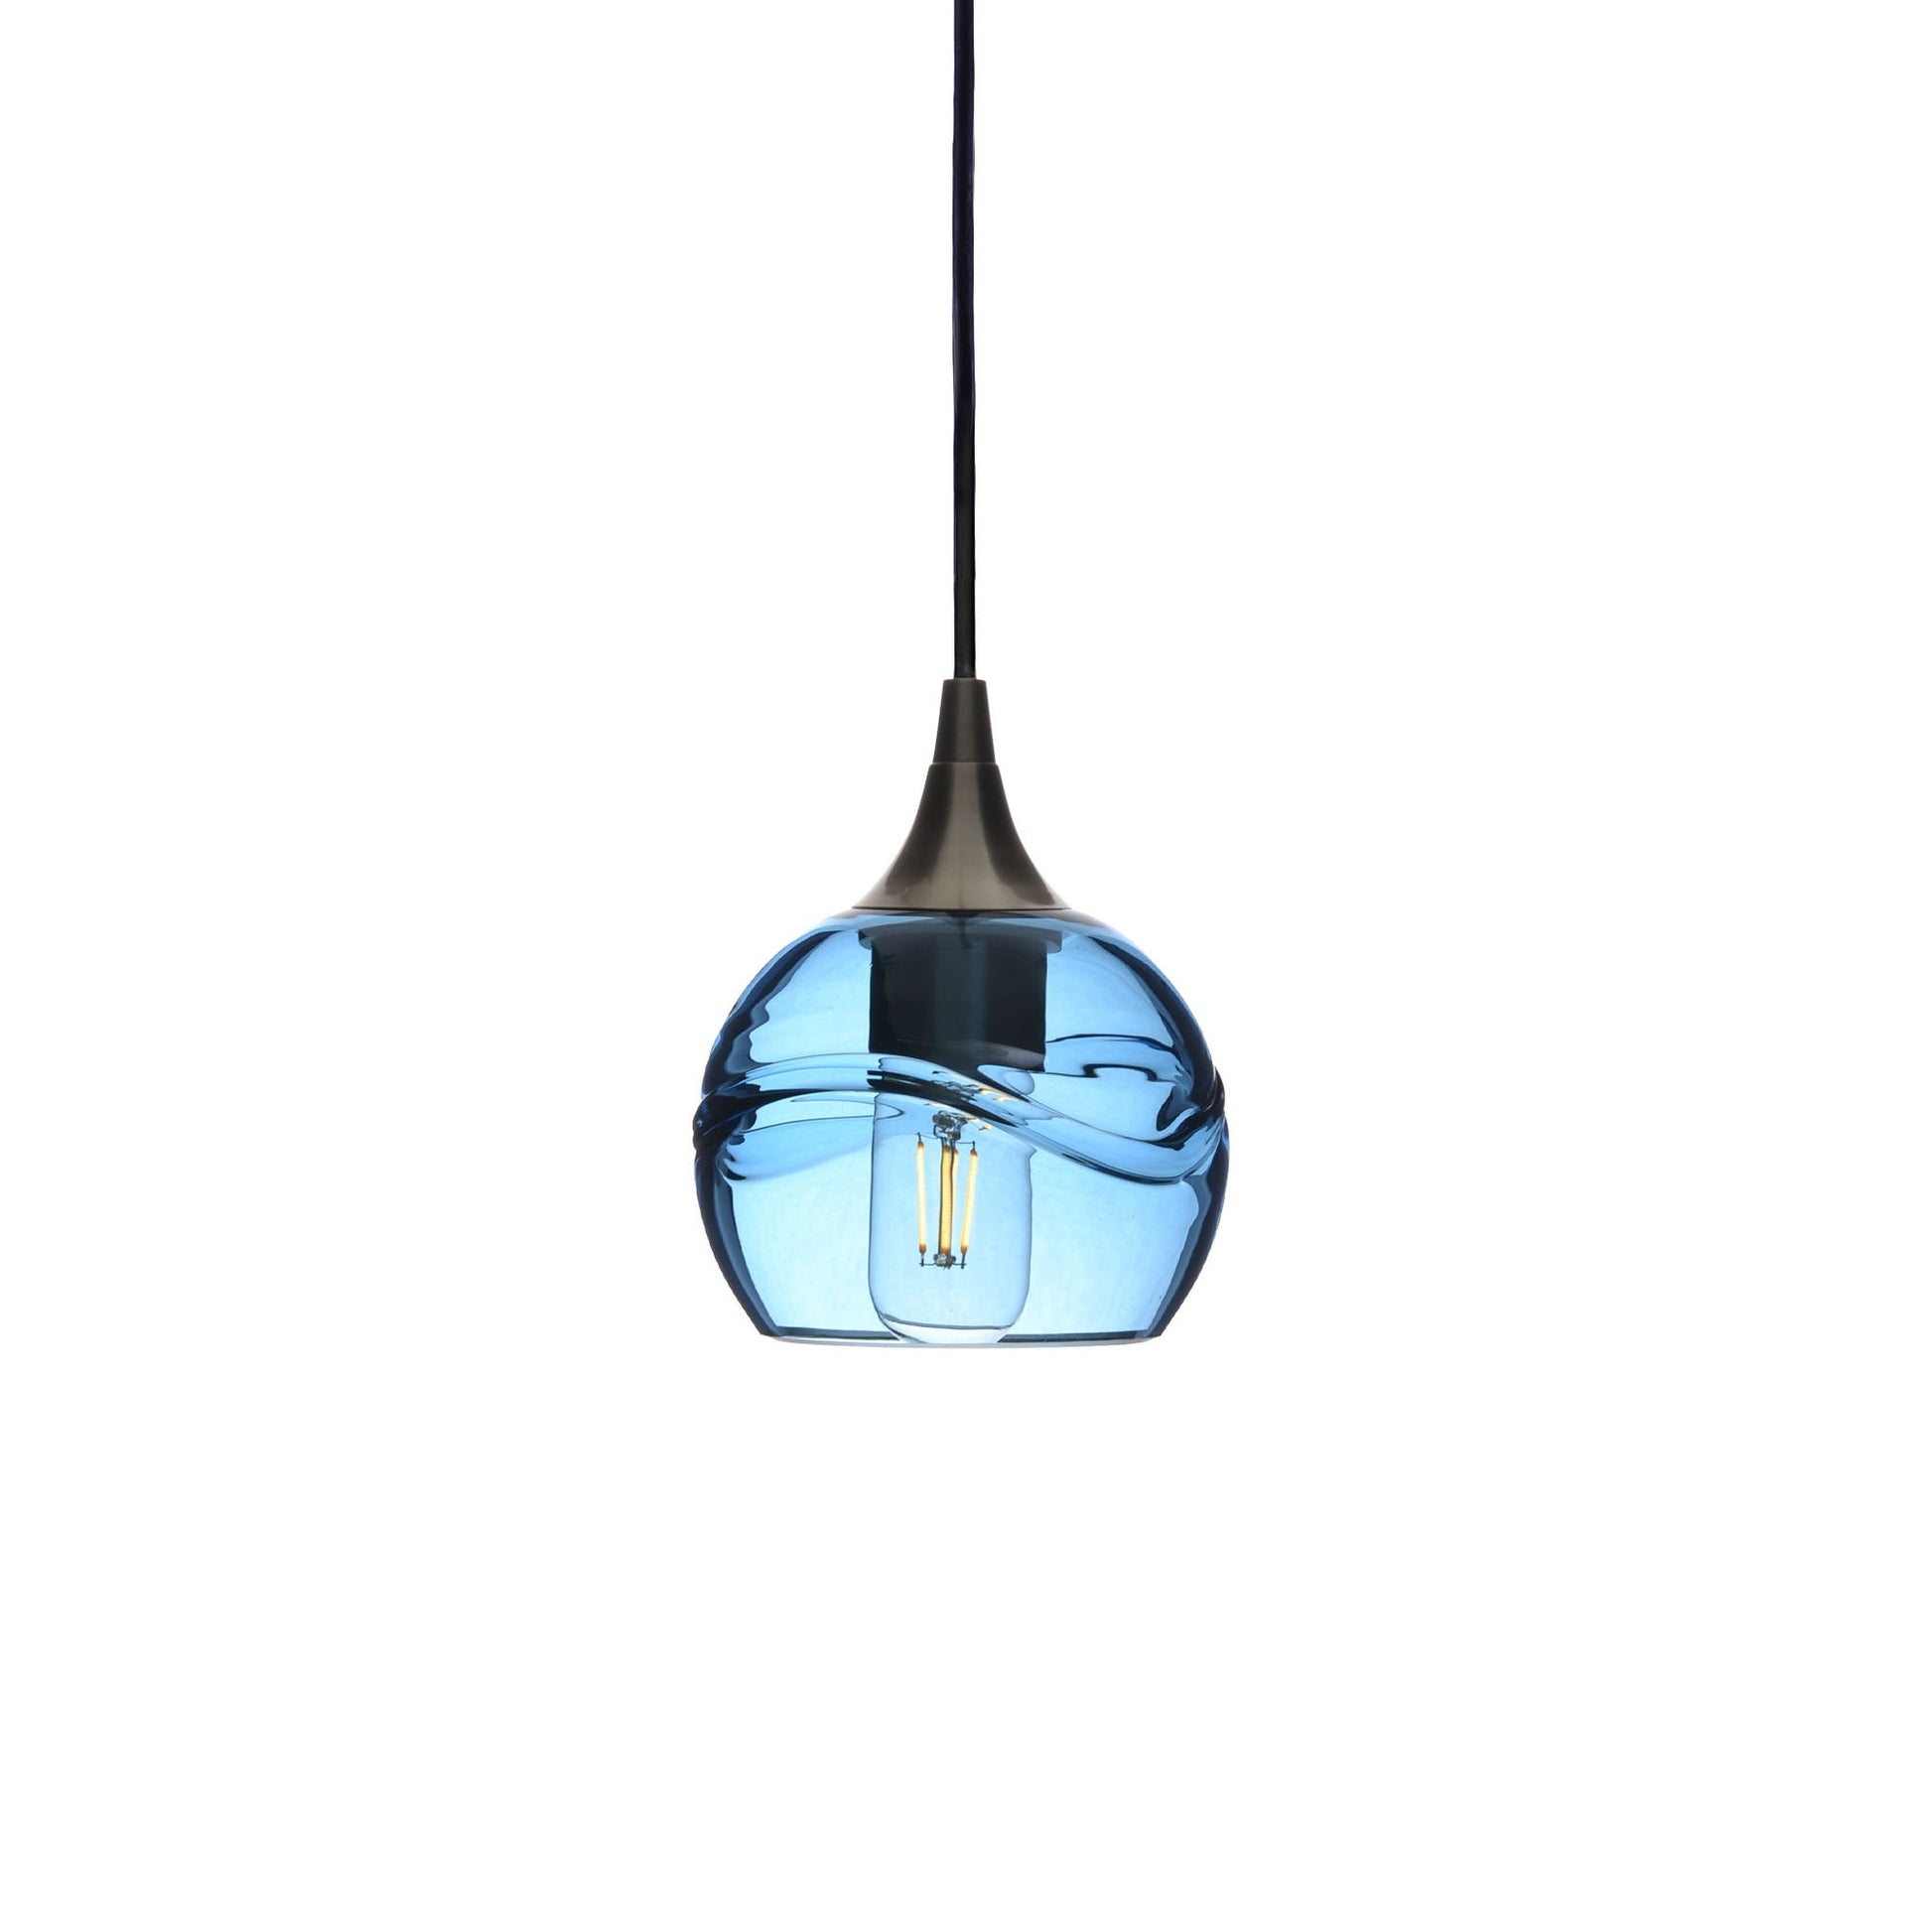 763 Swell: Single Pendant Light-Glass-Bicycle Glass Co - Hotshop-Steel Blue-Antique Bronze-Bicycle Glass Co